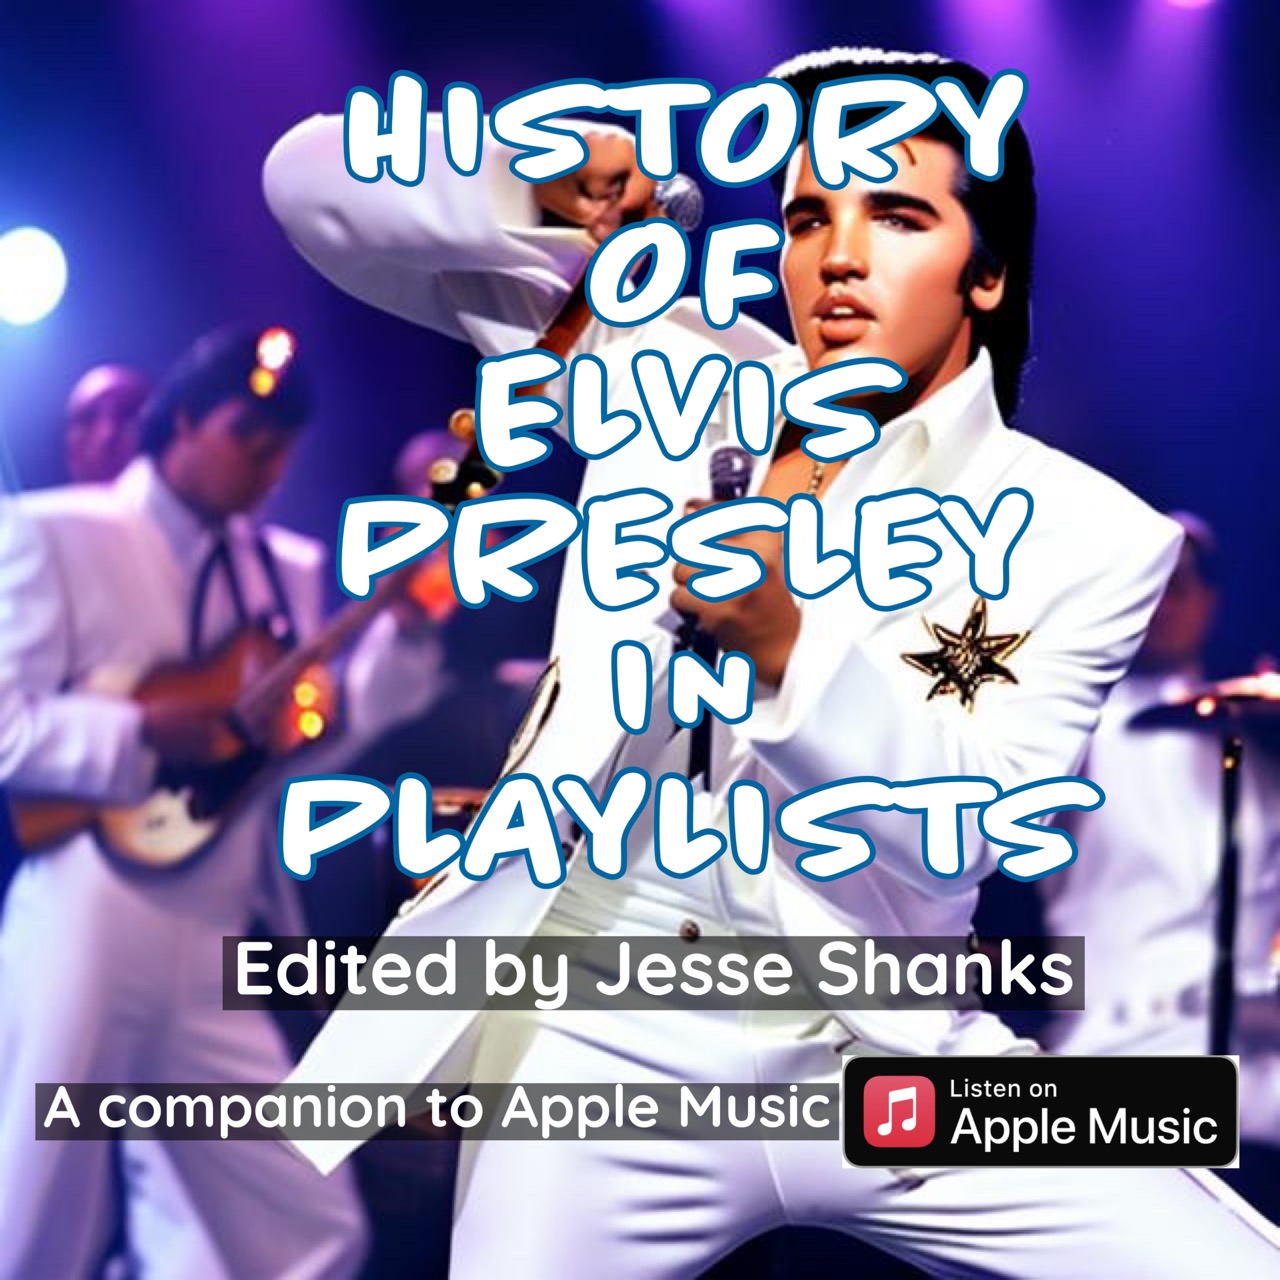 History of Elvis Presley in Playlists